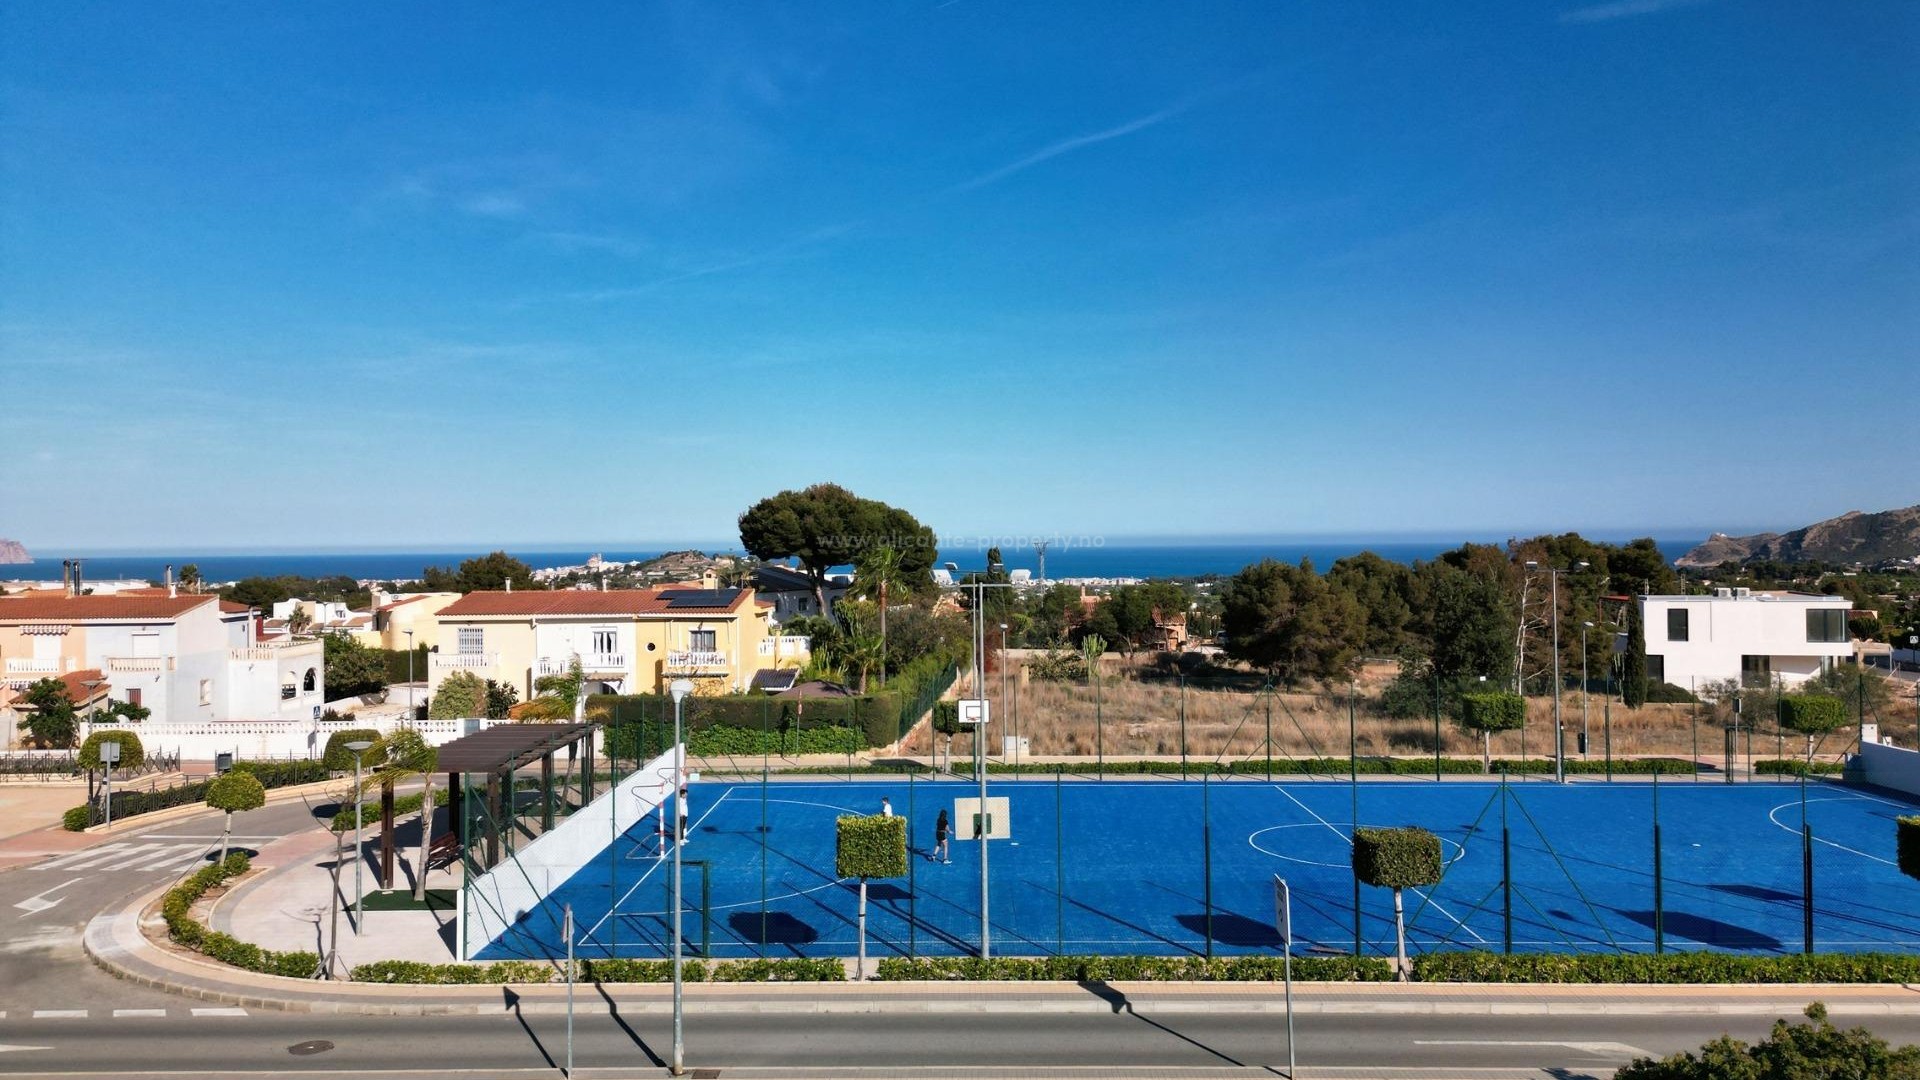 2/3 bedroom, 2 bathroom apartments and penthouses in La Nucia, terrace, outdoor pool, gym and shared spa with indoor heated pool